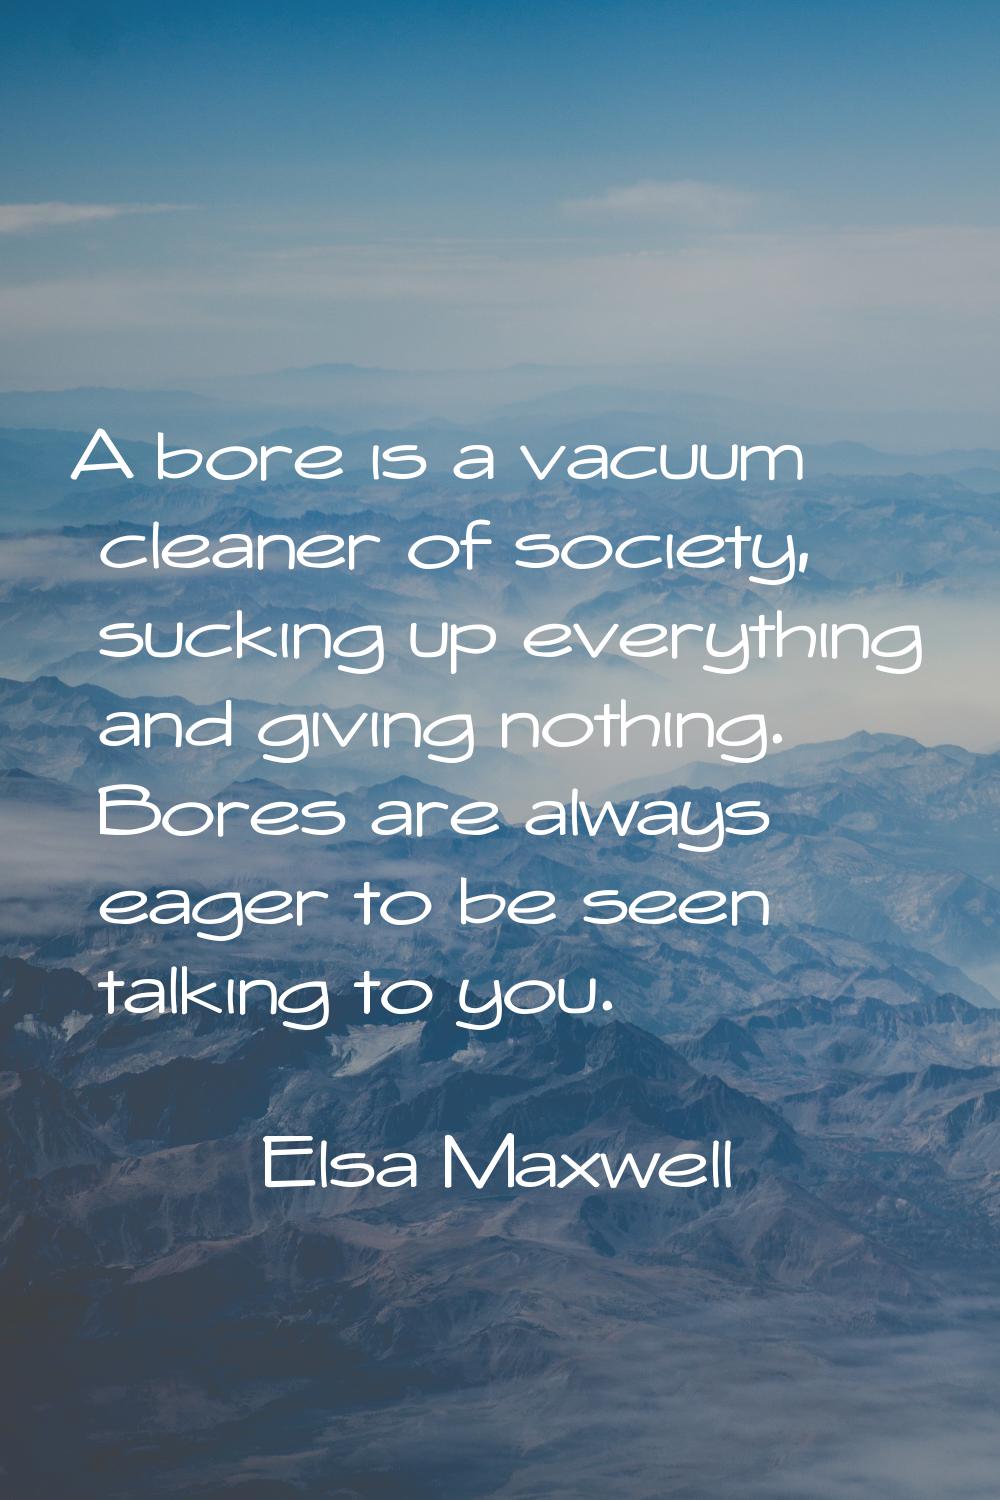 A bore is a vacuum cleaner of society, sucking up everything and giving nothing. Bores are always e